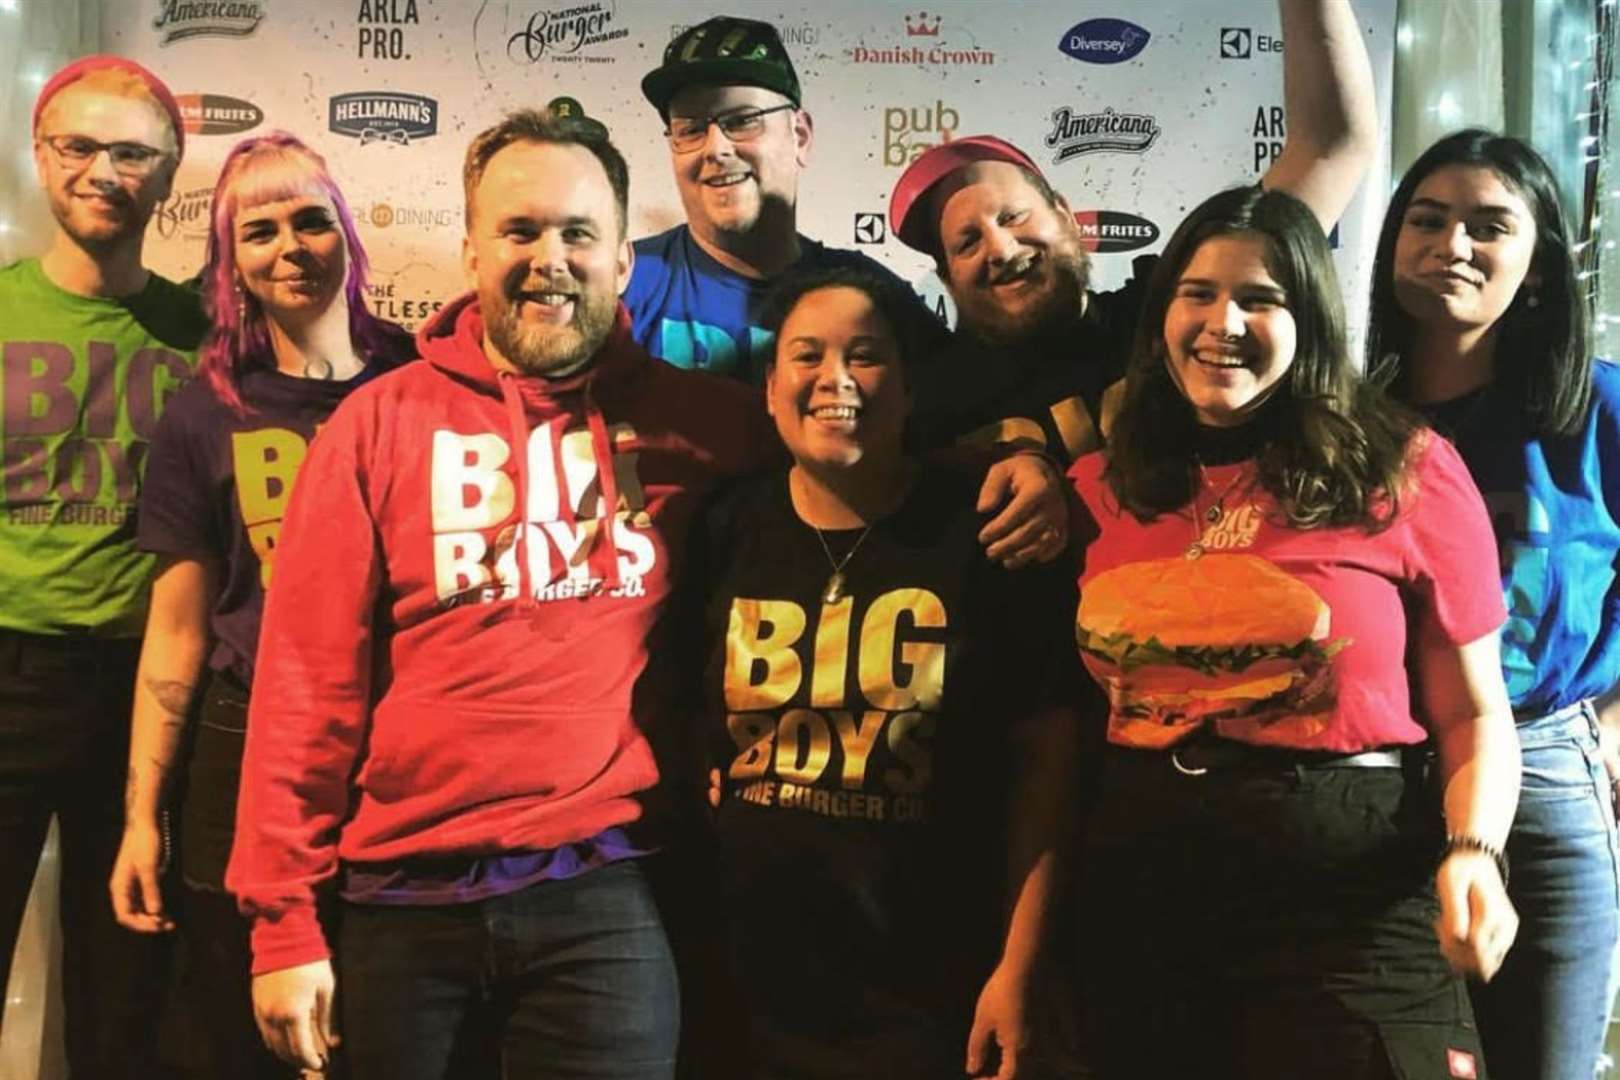 The Big Boys Fine Burger Co team celebrating their awards in 2020. Picture: _big _boys Instagram